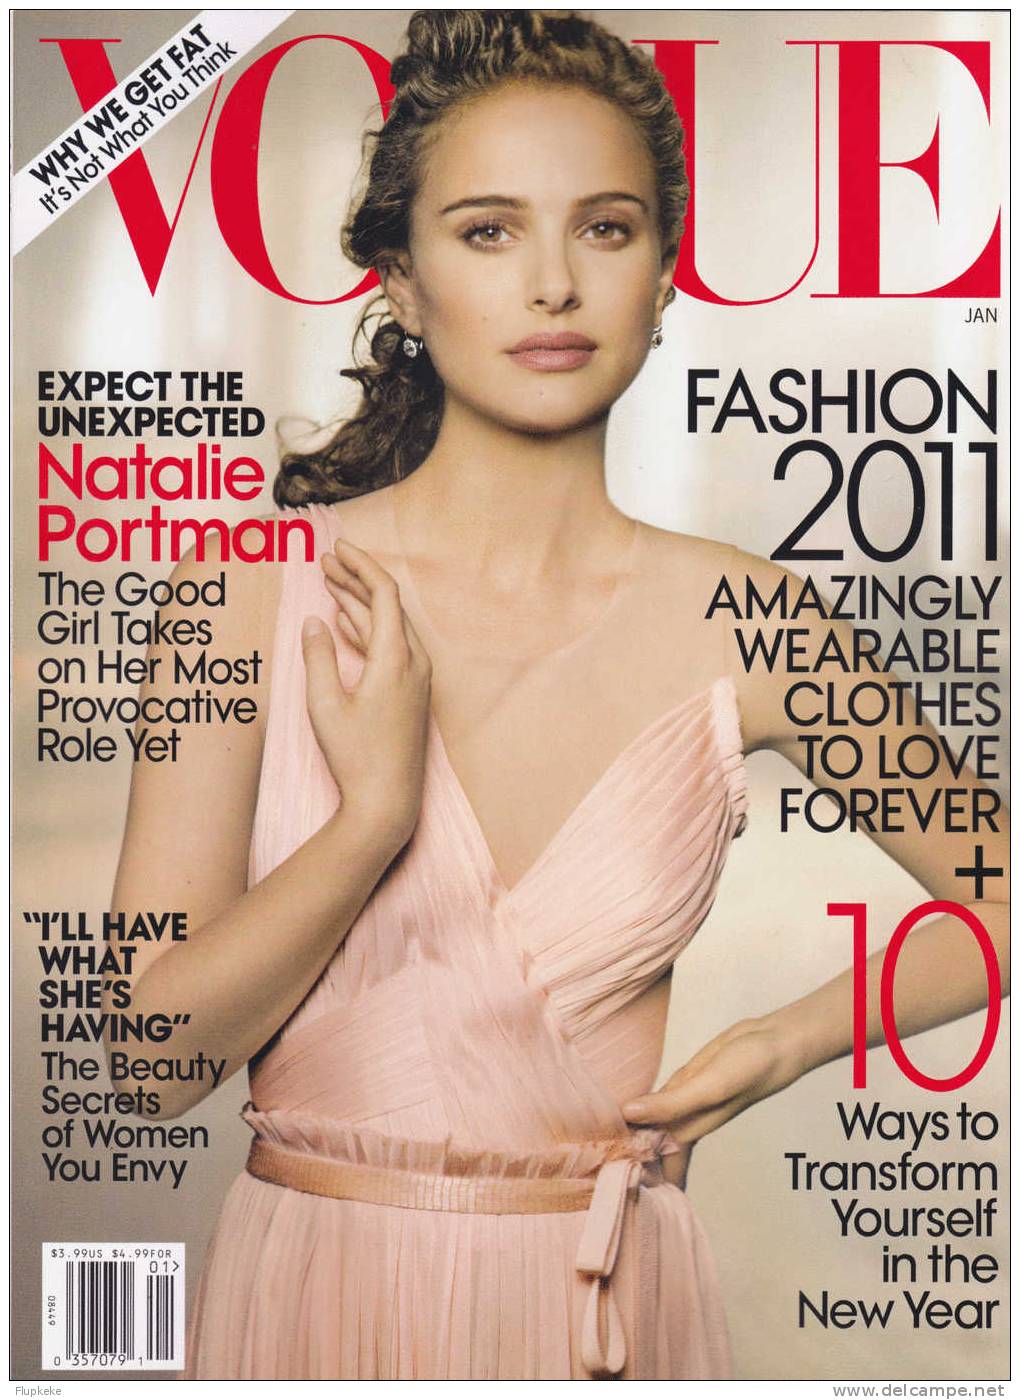 Vogue January 2011 Cover Natalie Portman Expect The Unexpected The Good Girl Takes On Her Most Provocative Role Yet - Unterhaltung